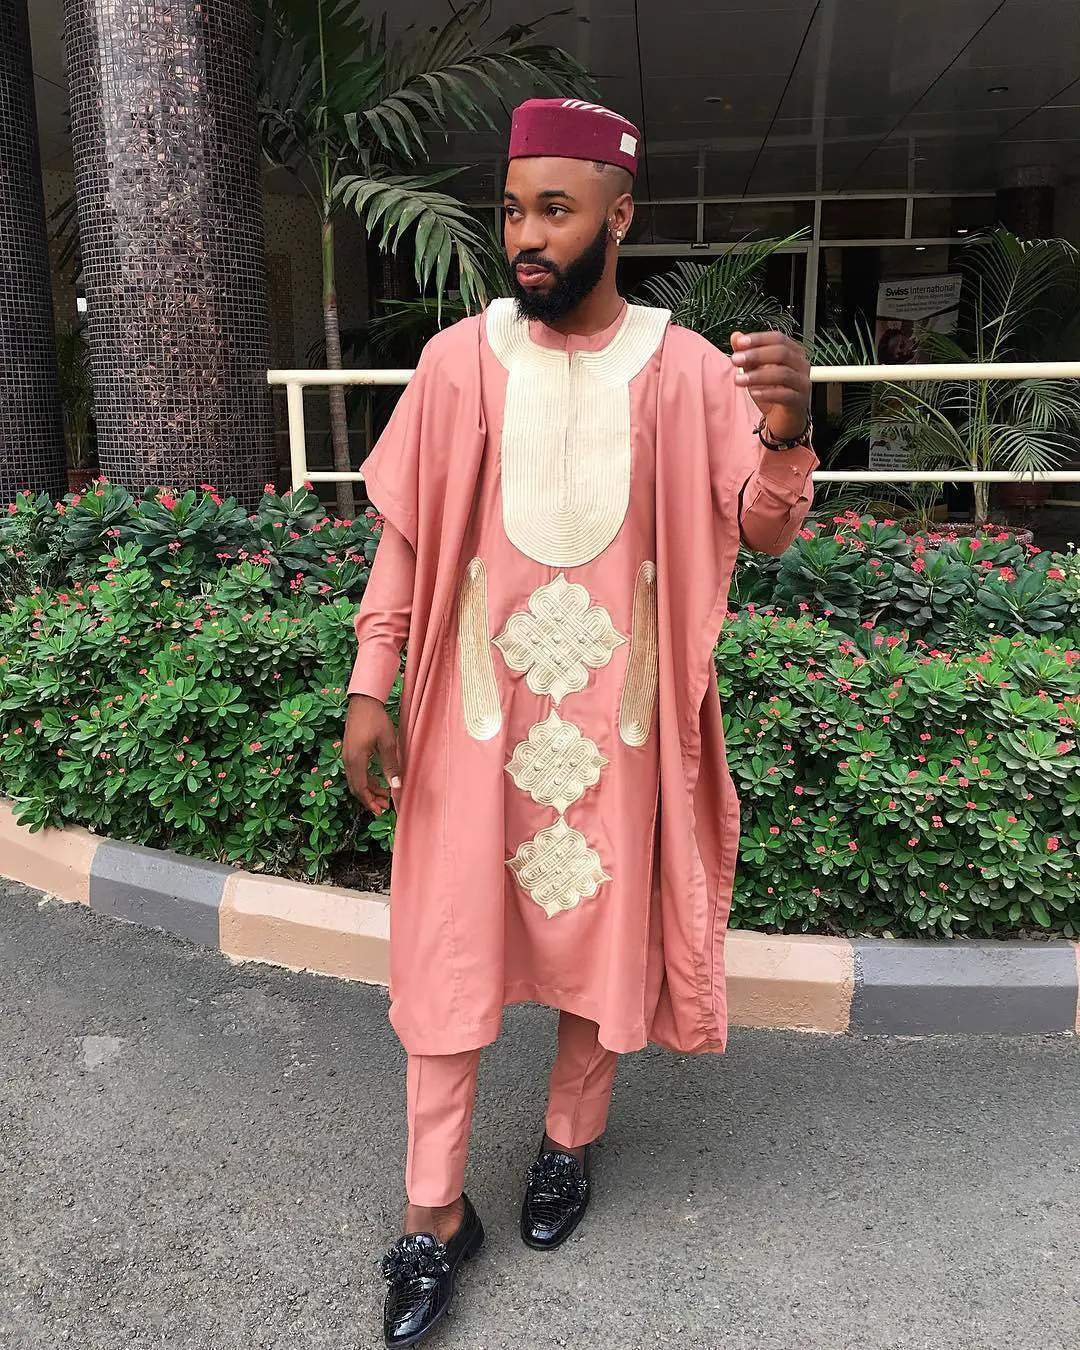 Are You Feeling These Sexy Male Traditional Outfits Or Nah??